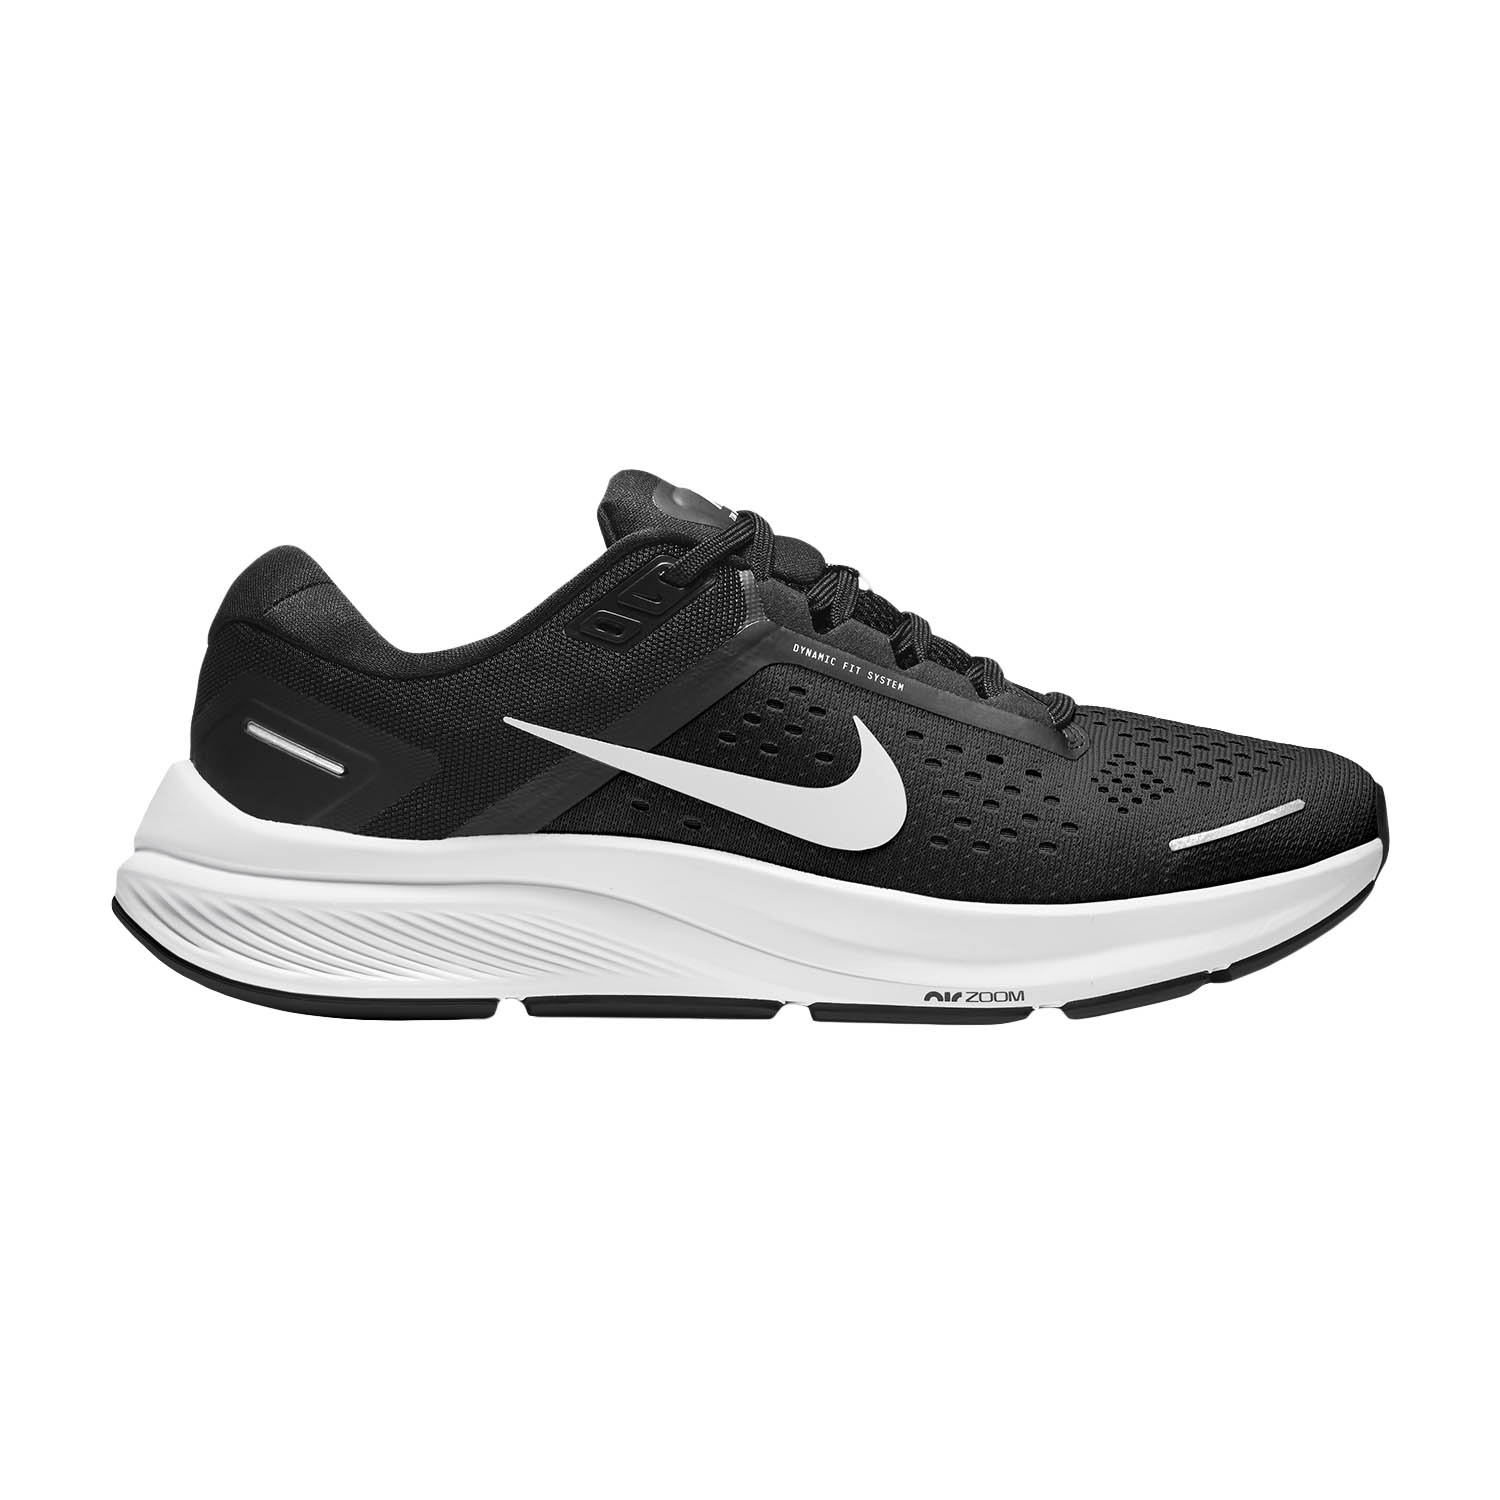 Nike Air Zoom Structure 23 Women's Running Shoes - Black